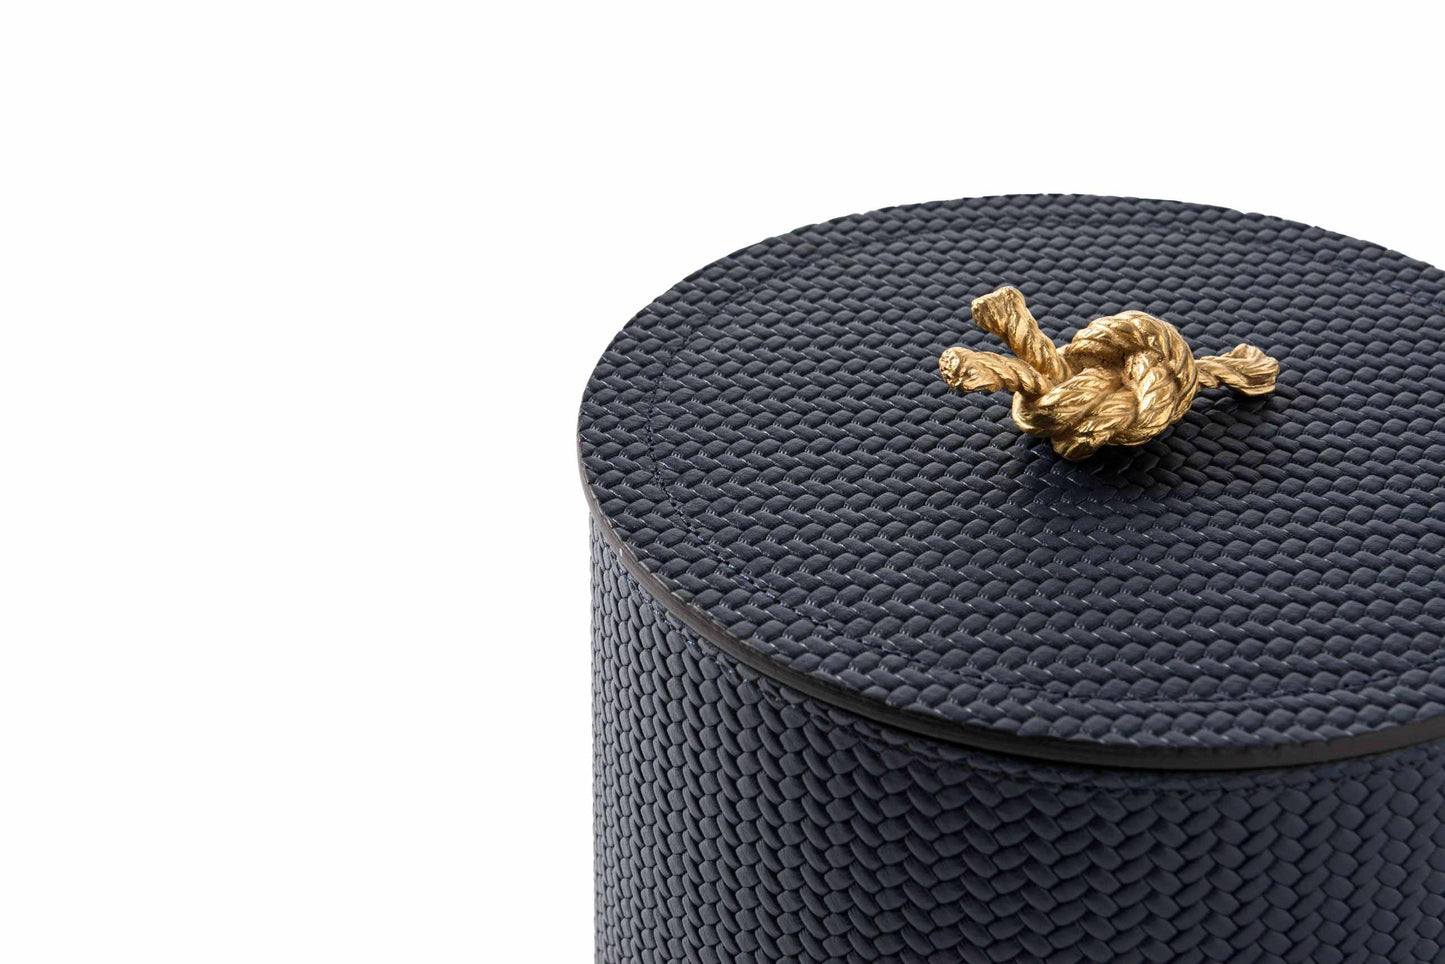 Thalia Trinket Box by Pinetti | Handmade in leather | Metal decorative element plated in 24k gold or silver polished | Home Decor Accessories | 2Jour Concierge, your luxury lifestyle shop